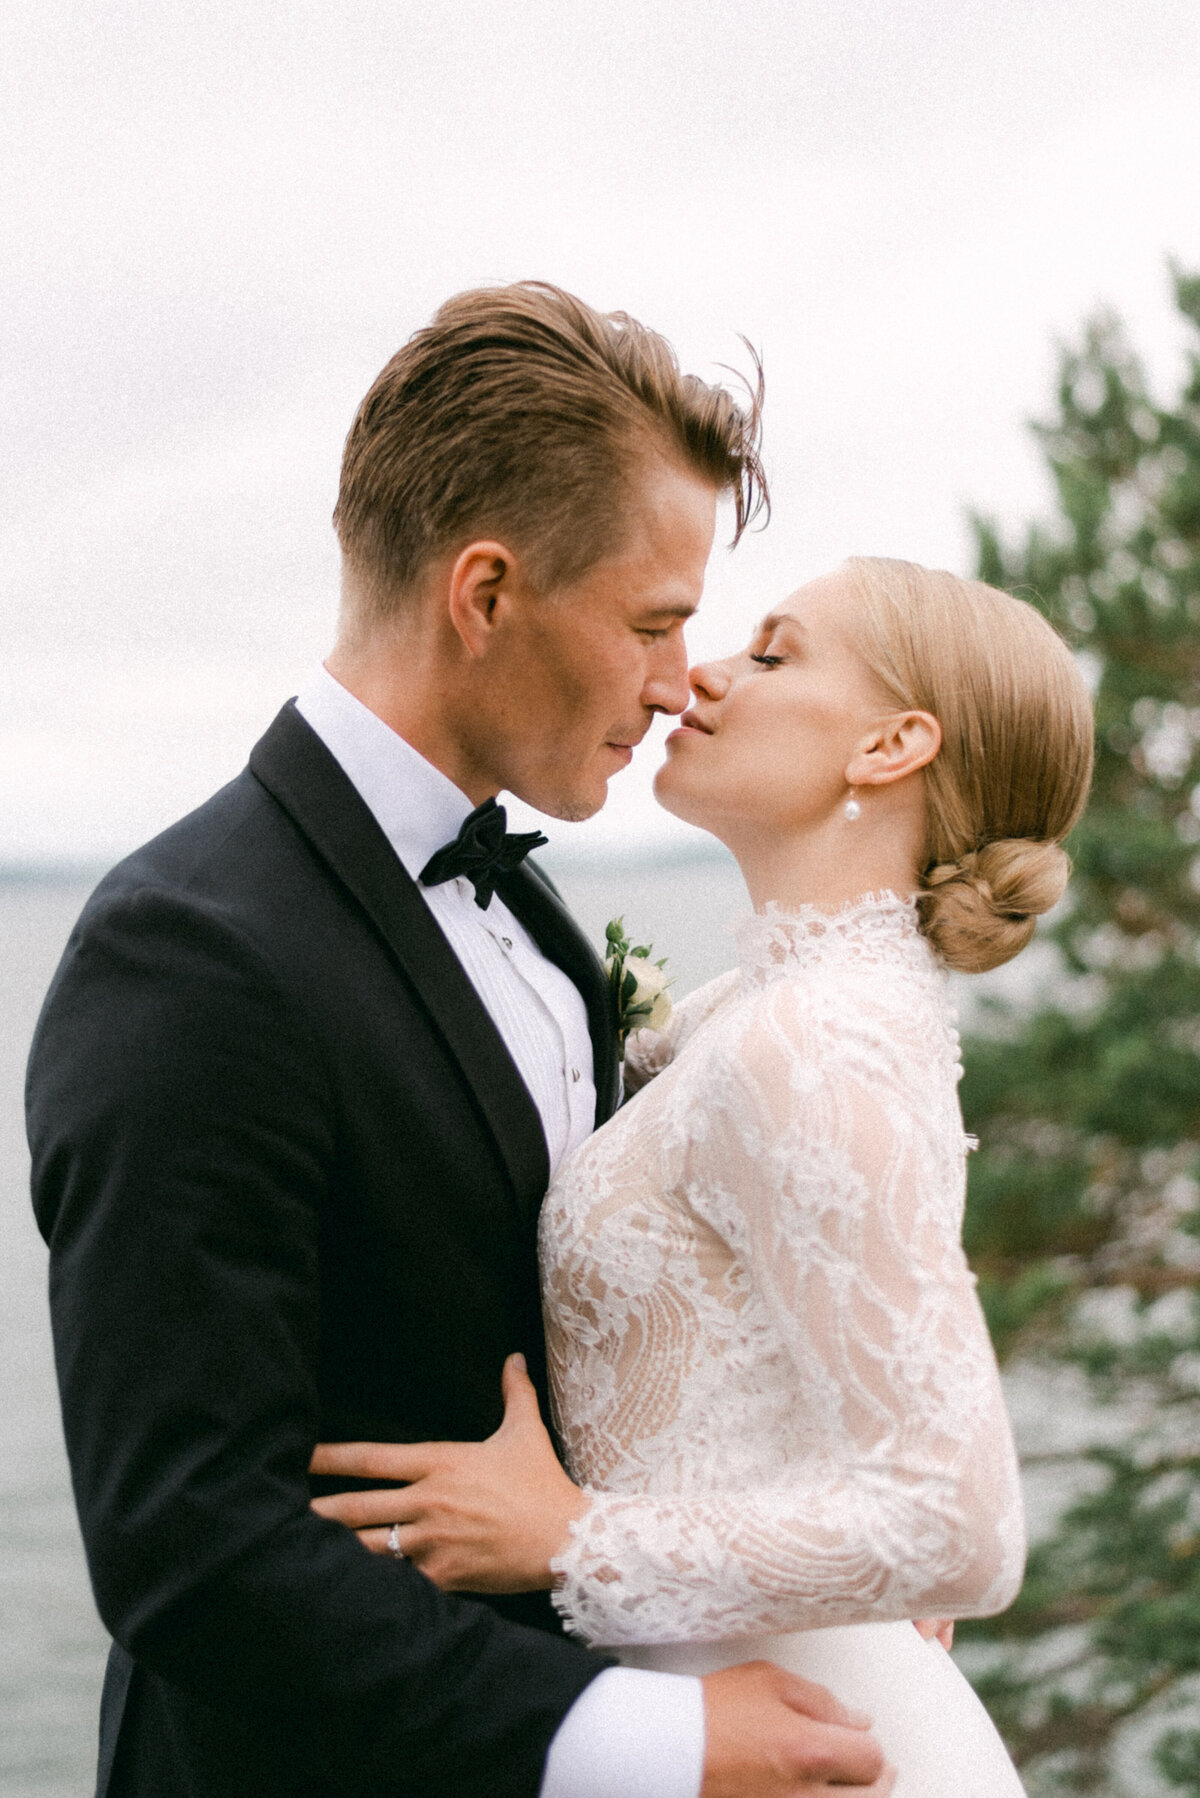 Bride and groom in a wedding image taken in Finland by photographer Hannika Gabrielsson